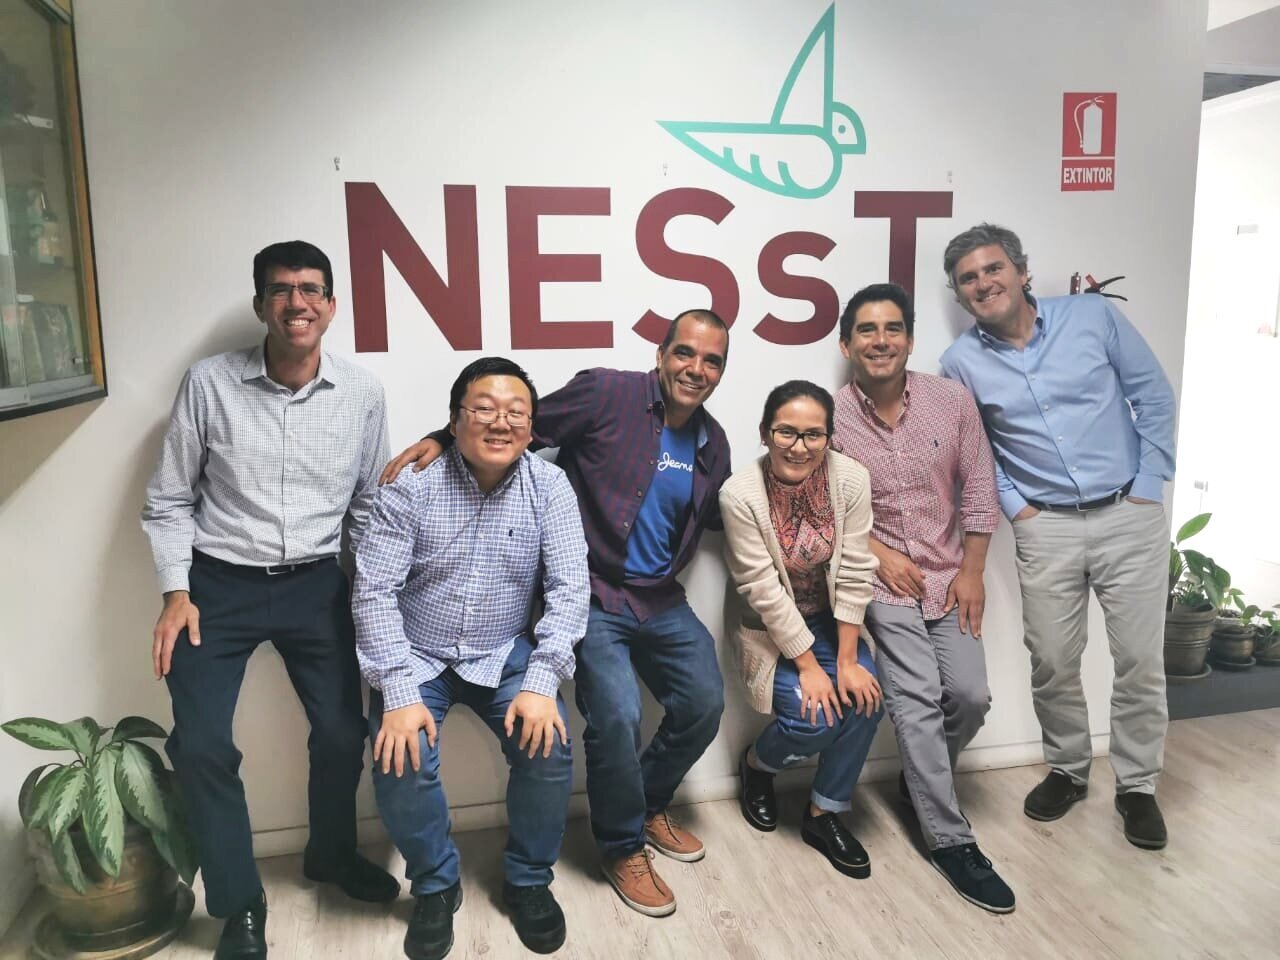 Left to right: Chad Sachs, NESsT Fund Director, Javier Gondo, NESsT Fund Portfolio Manager, Marco Piñatelli, Inka Moss Founder, Isabel Castillo, Country Director of Peru, Christian Perez, Greenbox Co-Founder, Johannes Da Fieno, Co-Founder of Greenbo…